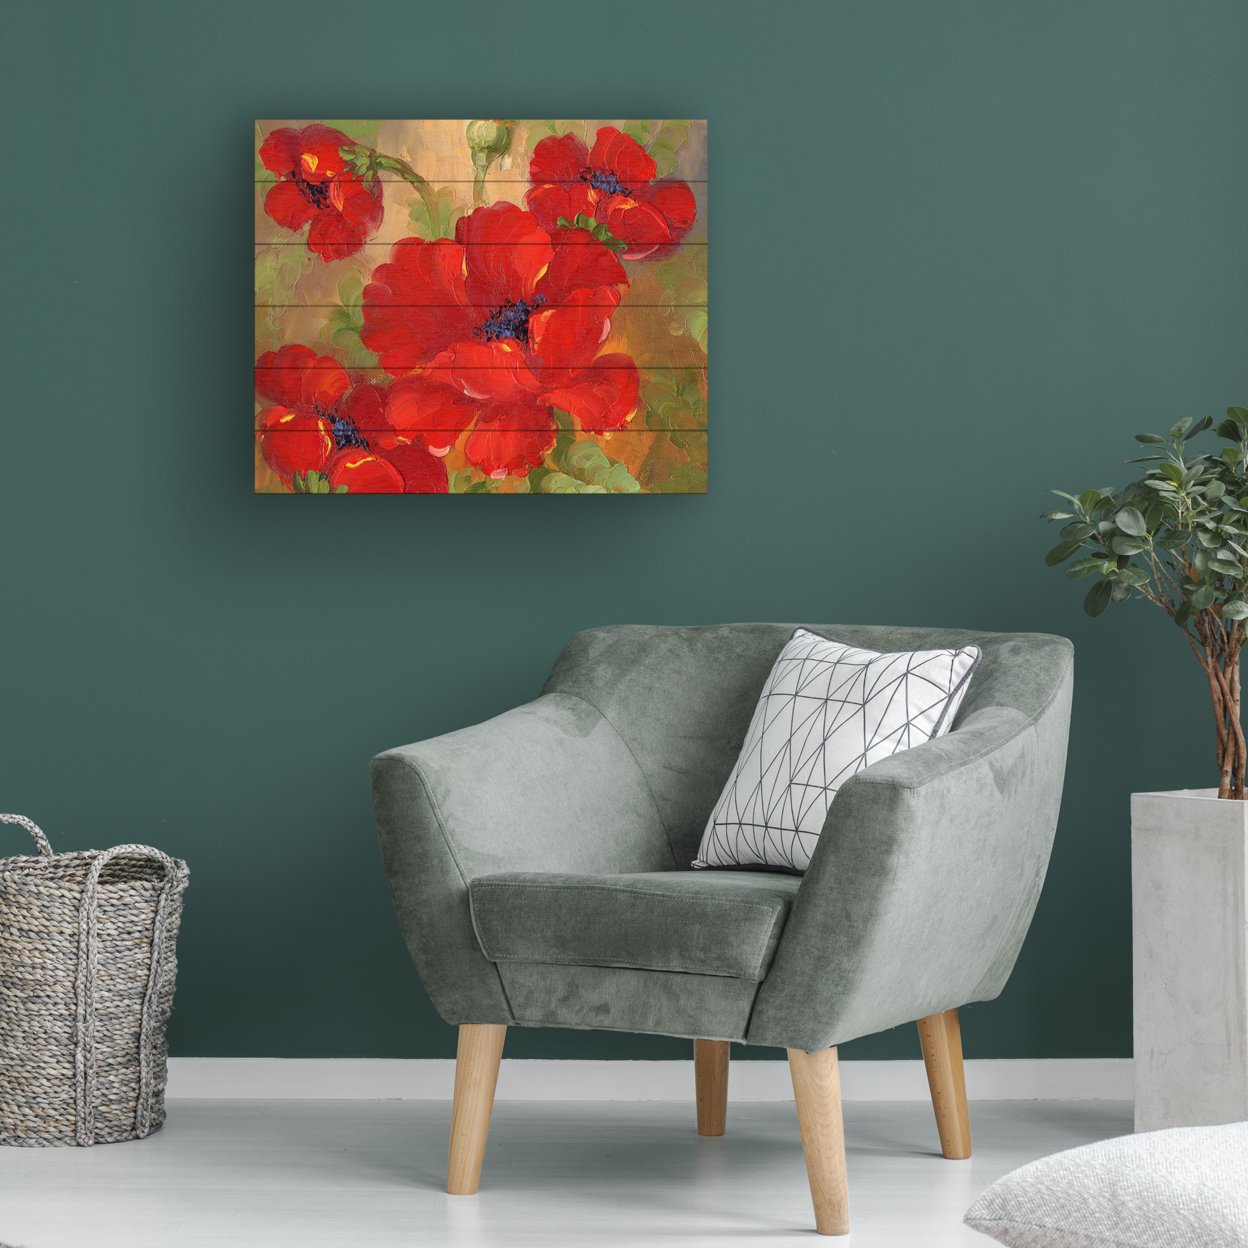 Wooden Slat Art 18 X 22 Inches Titled Poppies Ready To Hang Home Decor Picture